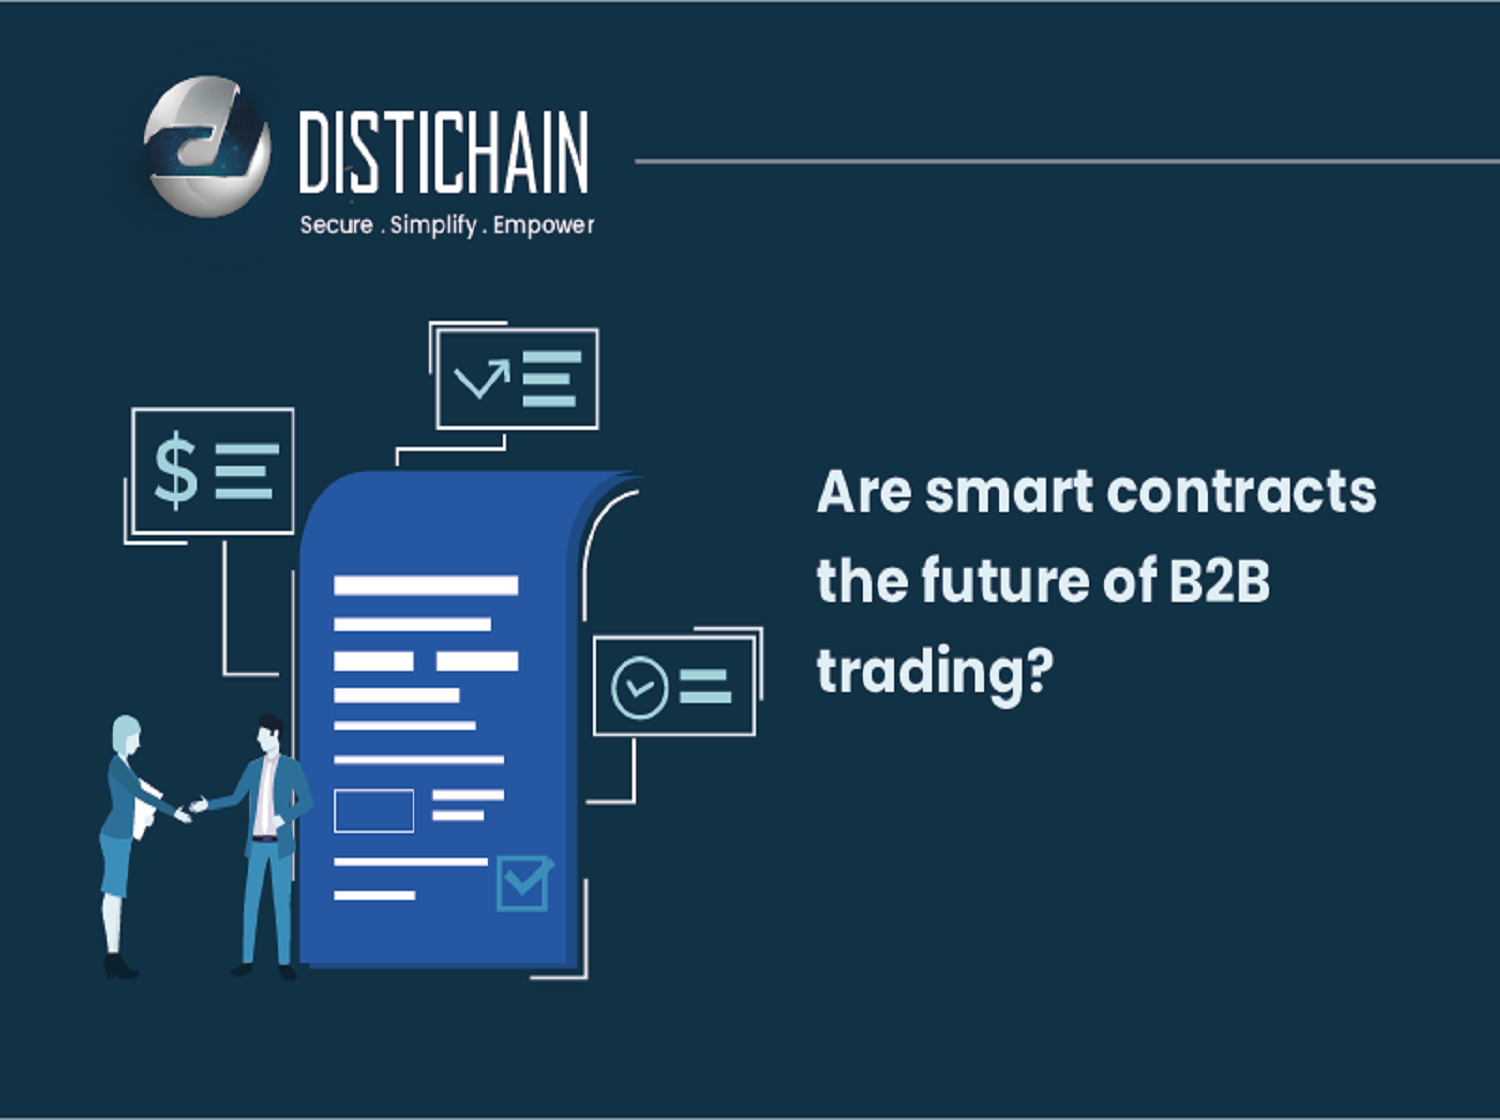 Distichain take on smart contracts for b2b trading